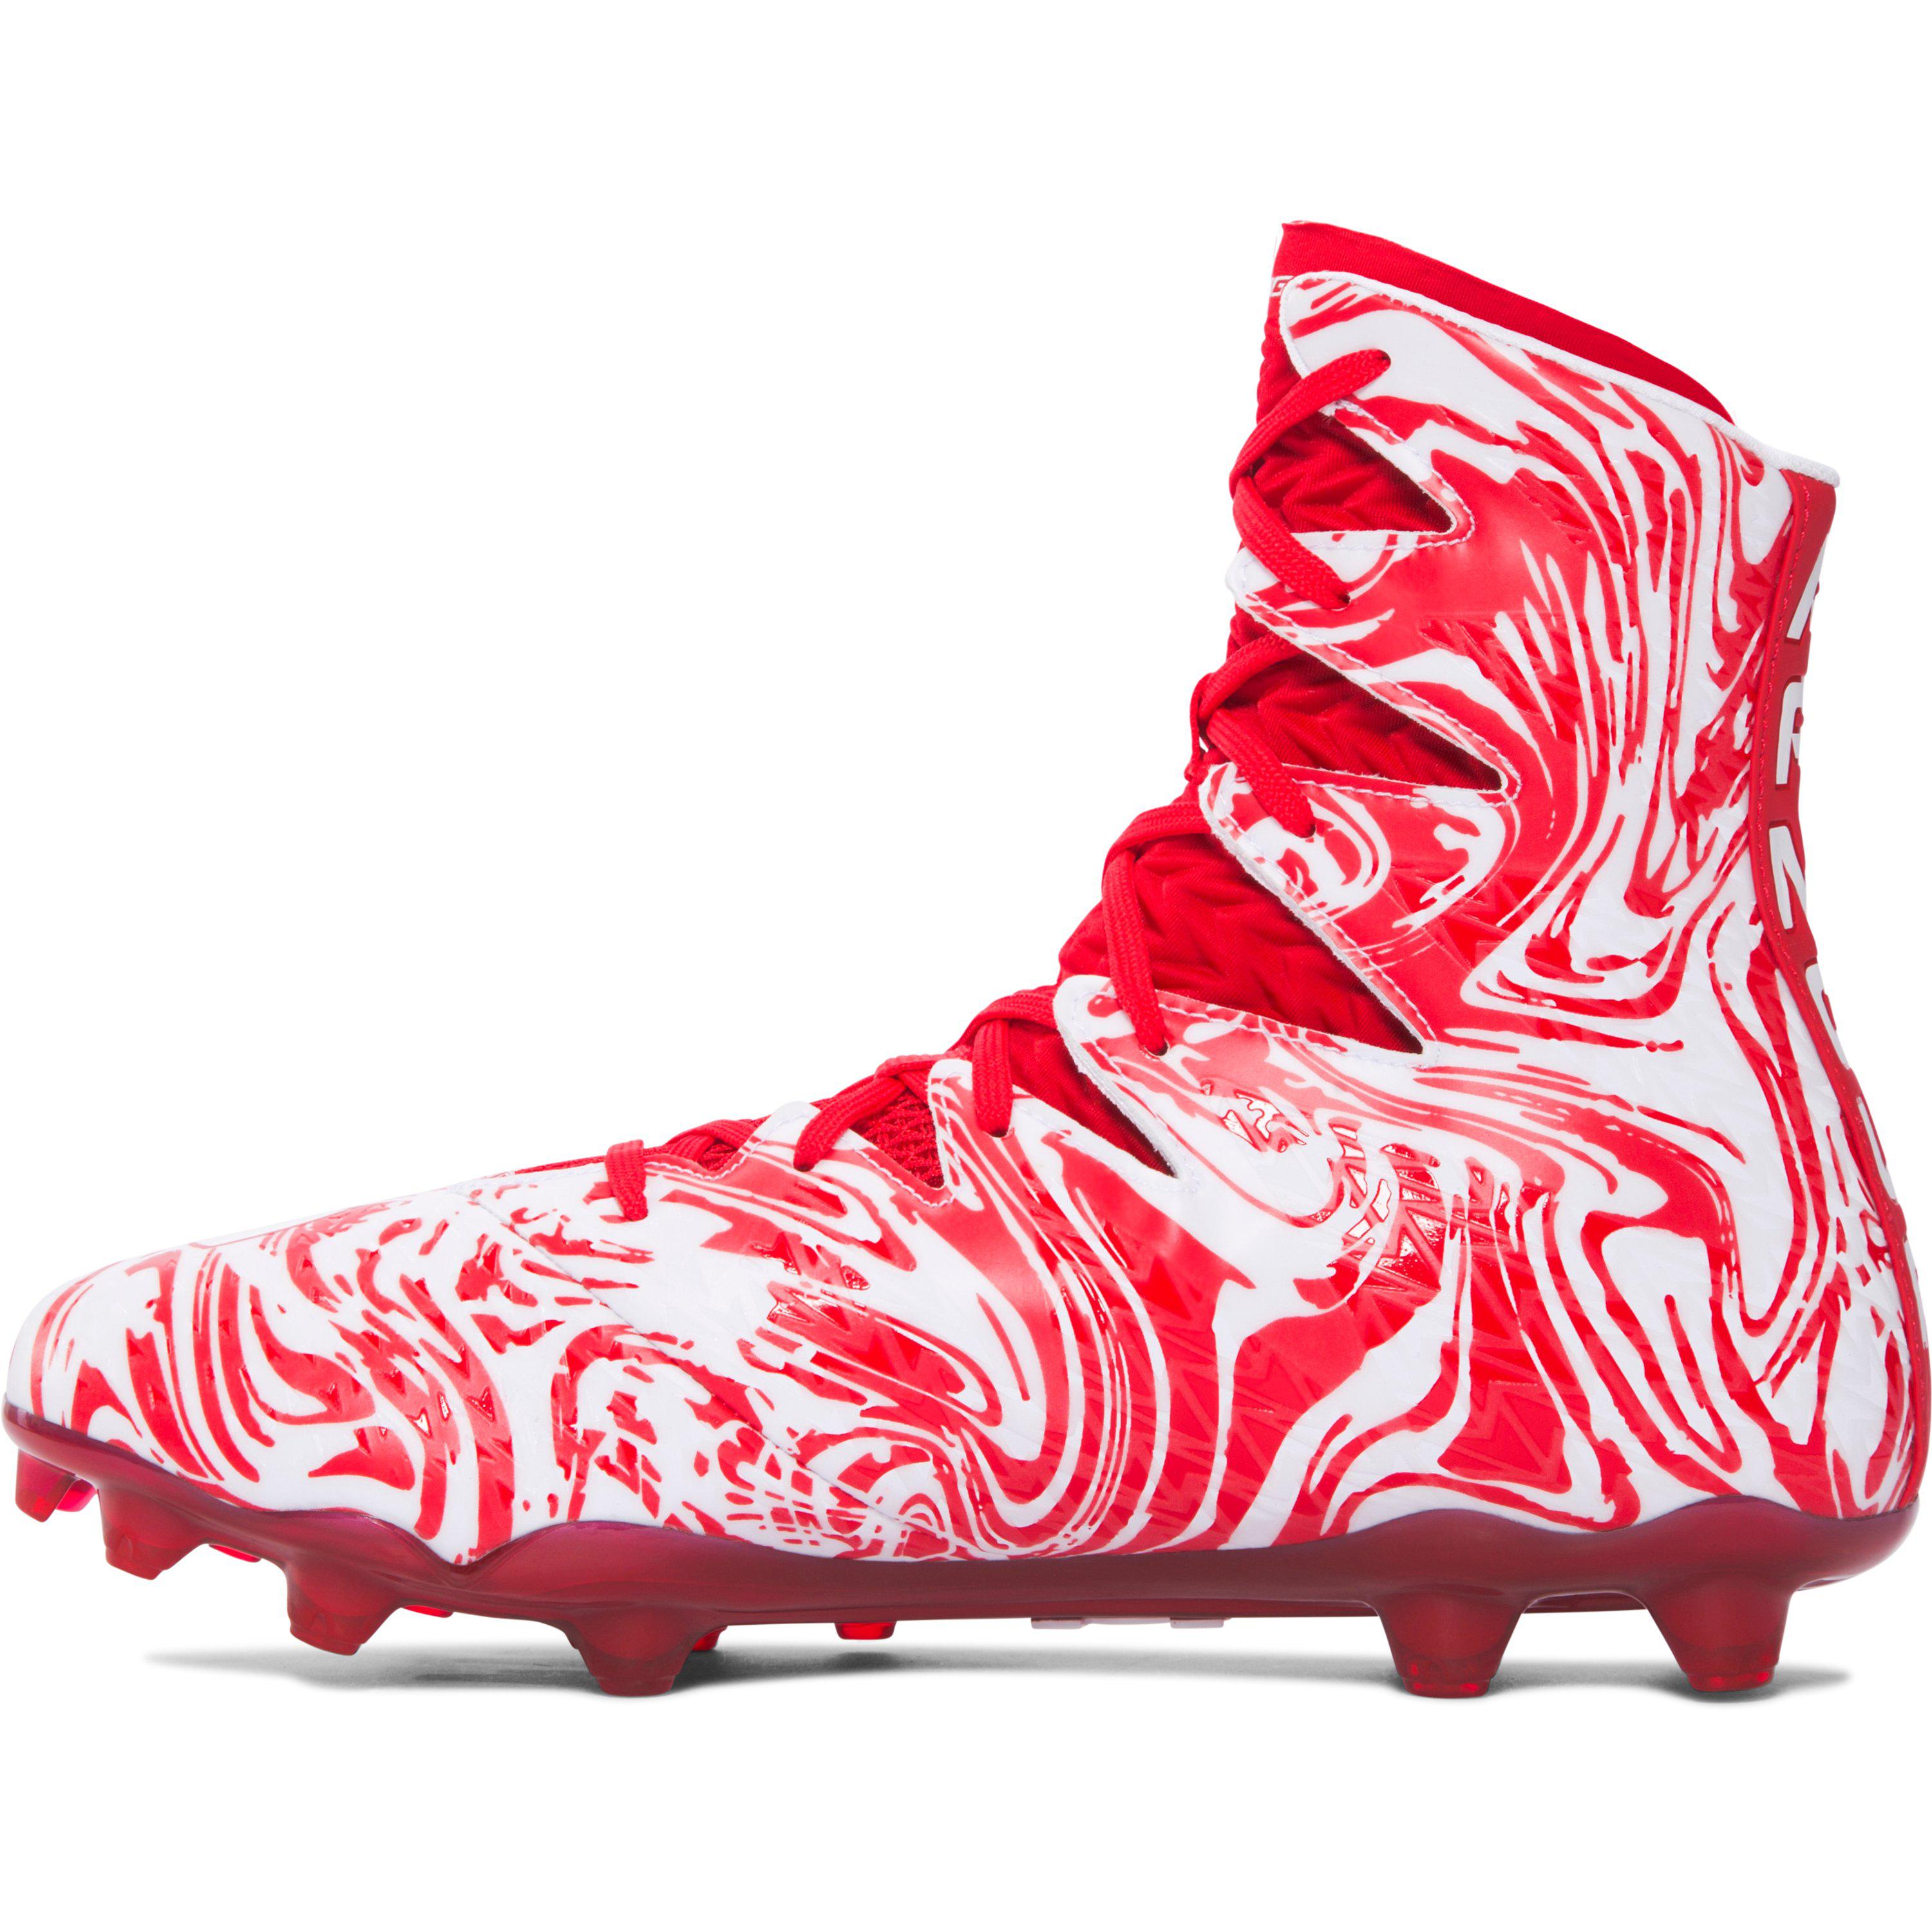 Mens UNDER ARMOUR HIGHLIGHT SELECT Football Cleats RED/WHITE 3000418-601 Details about   New 